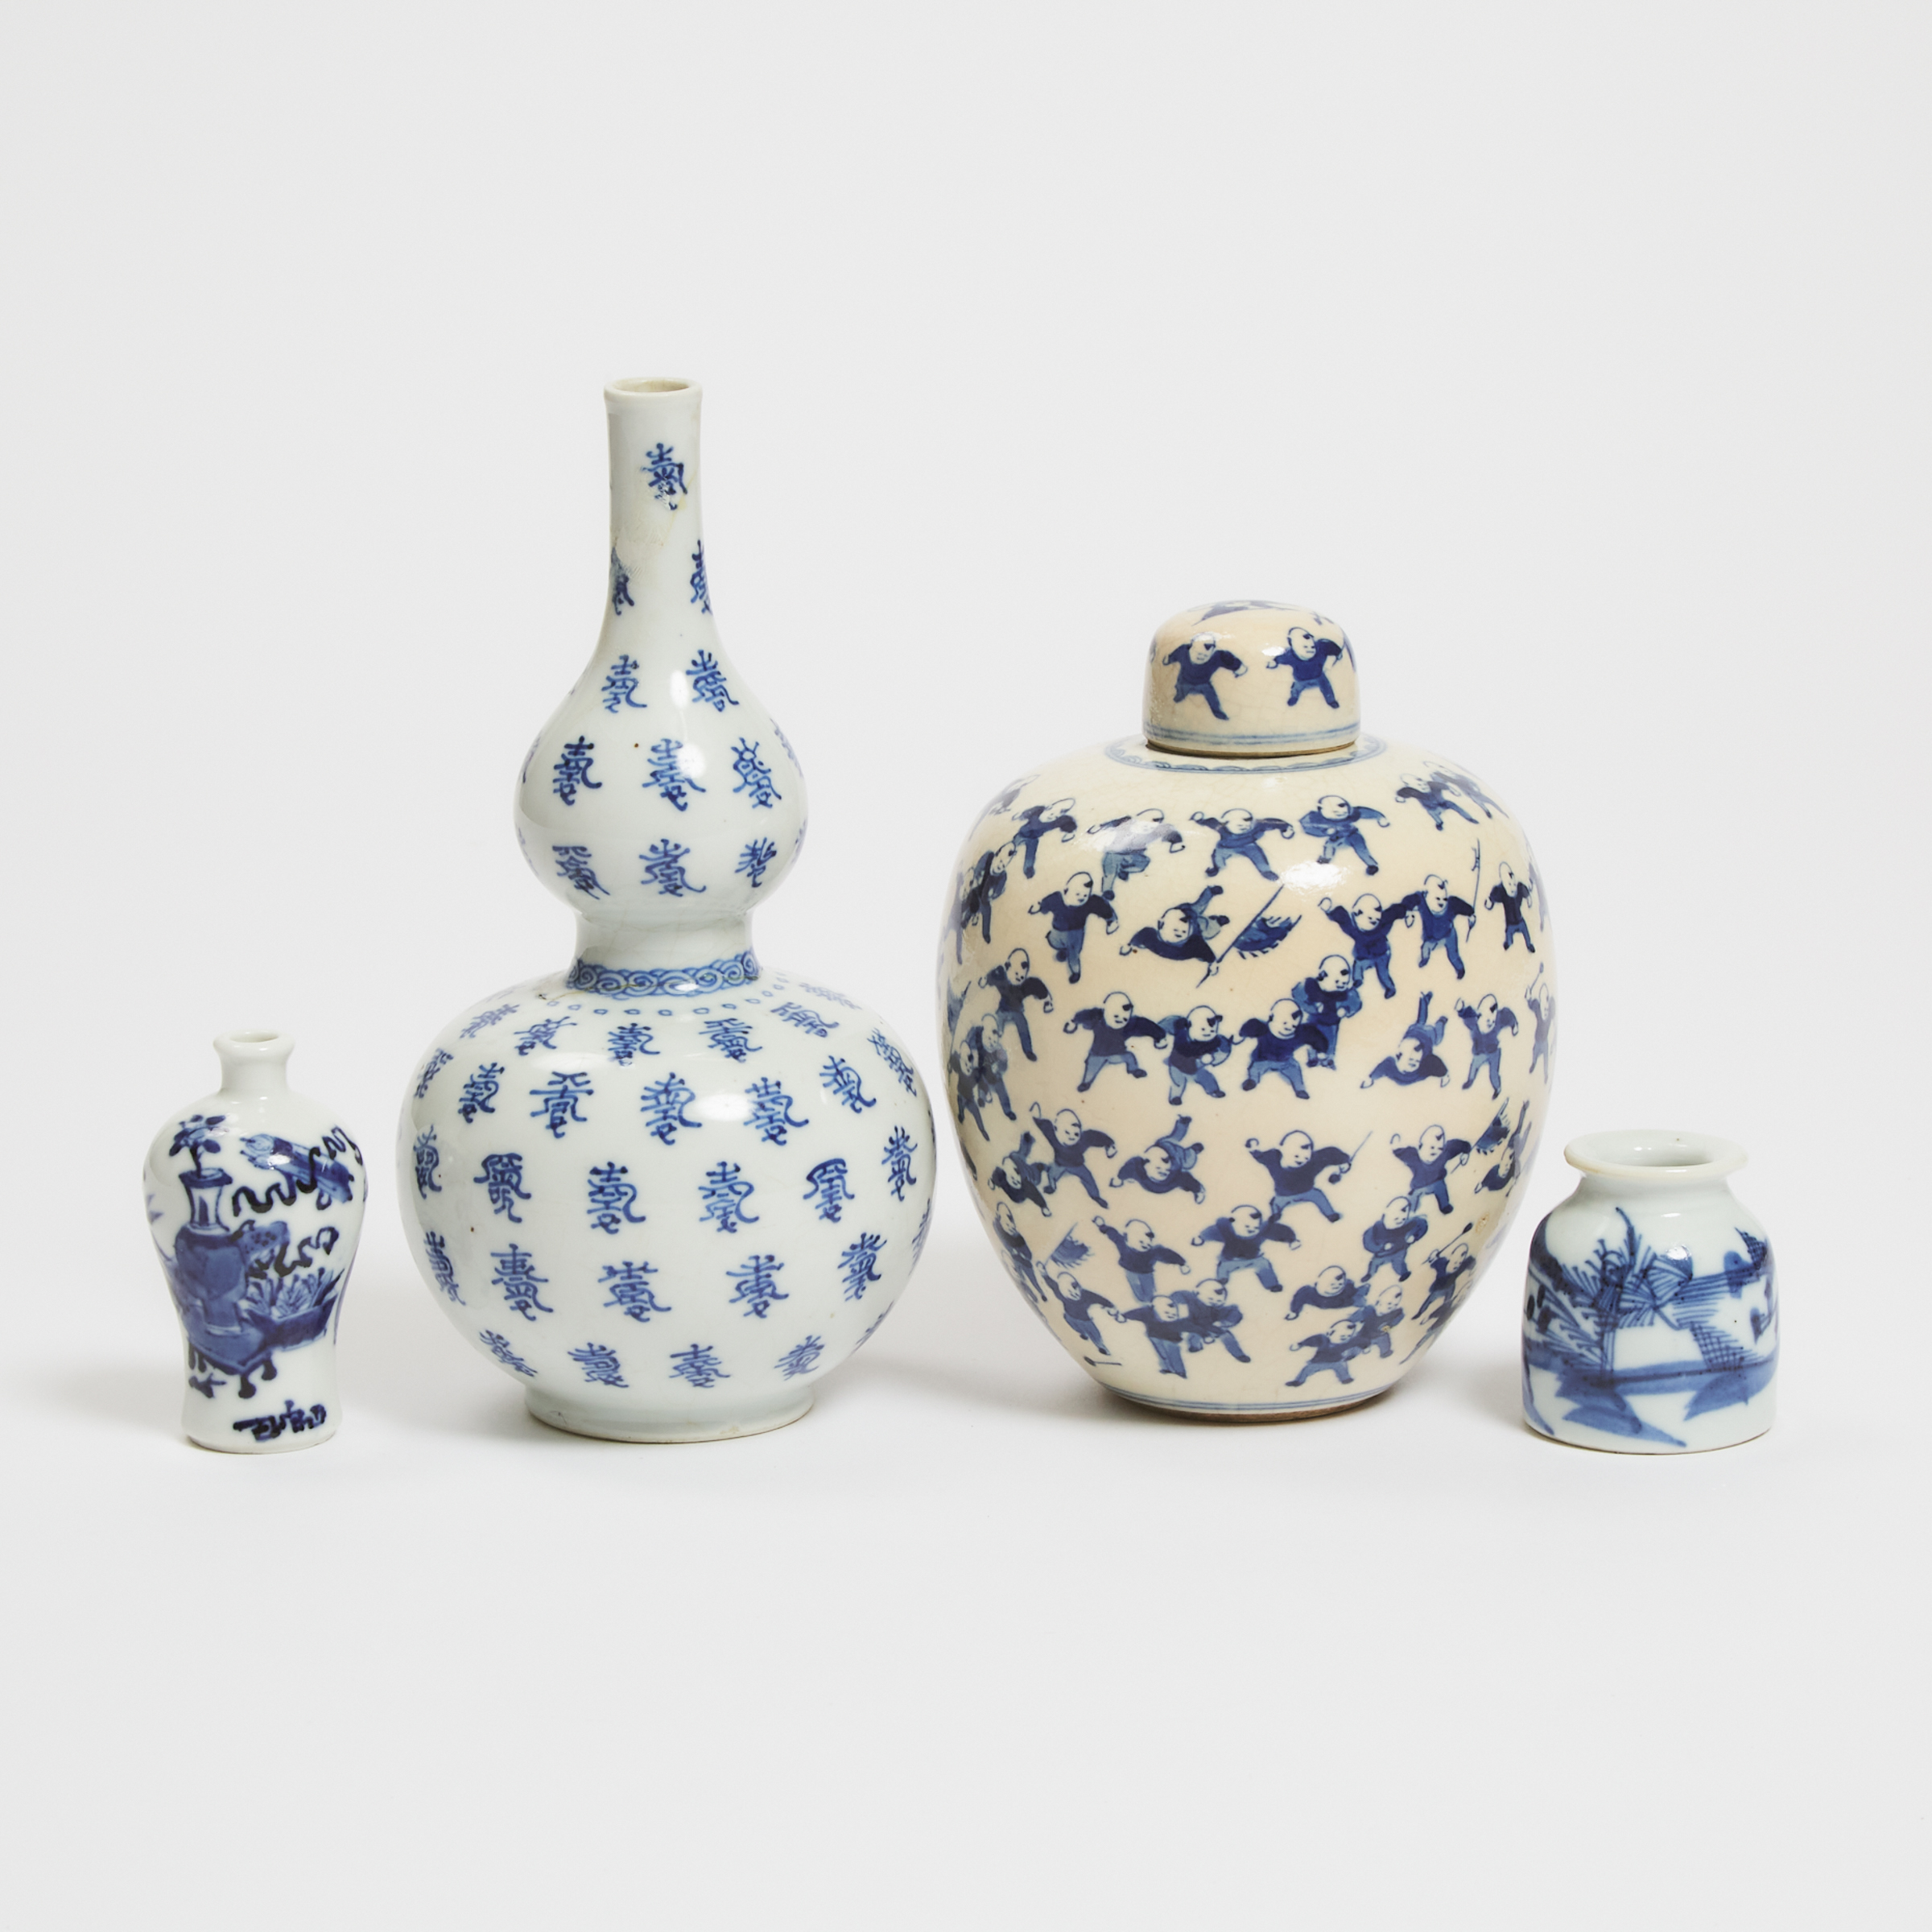 A Group of Four Blue and White Vessels, Kangxi Period and Later